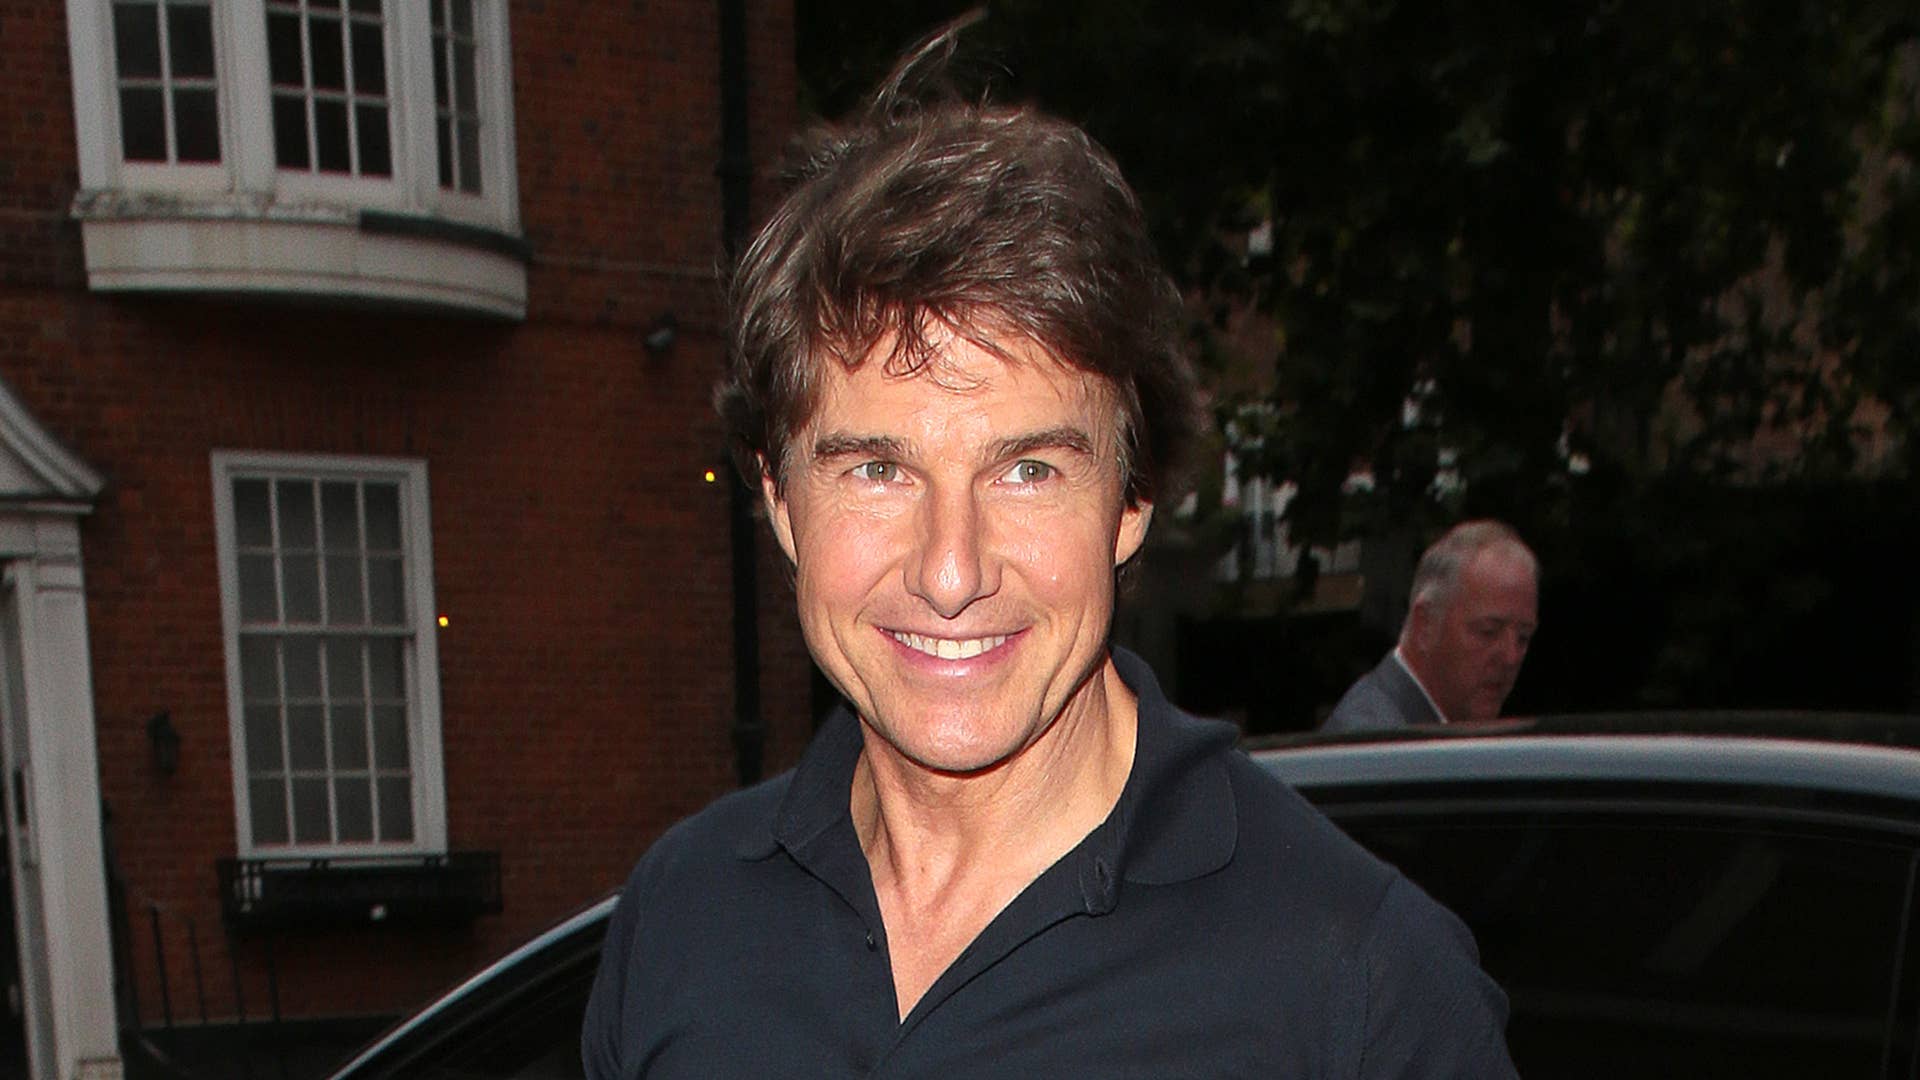 Tom Cruise seen on a night out at The Twenty Two restaurant.